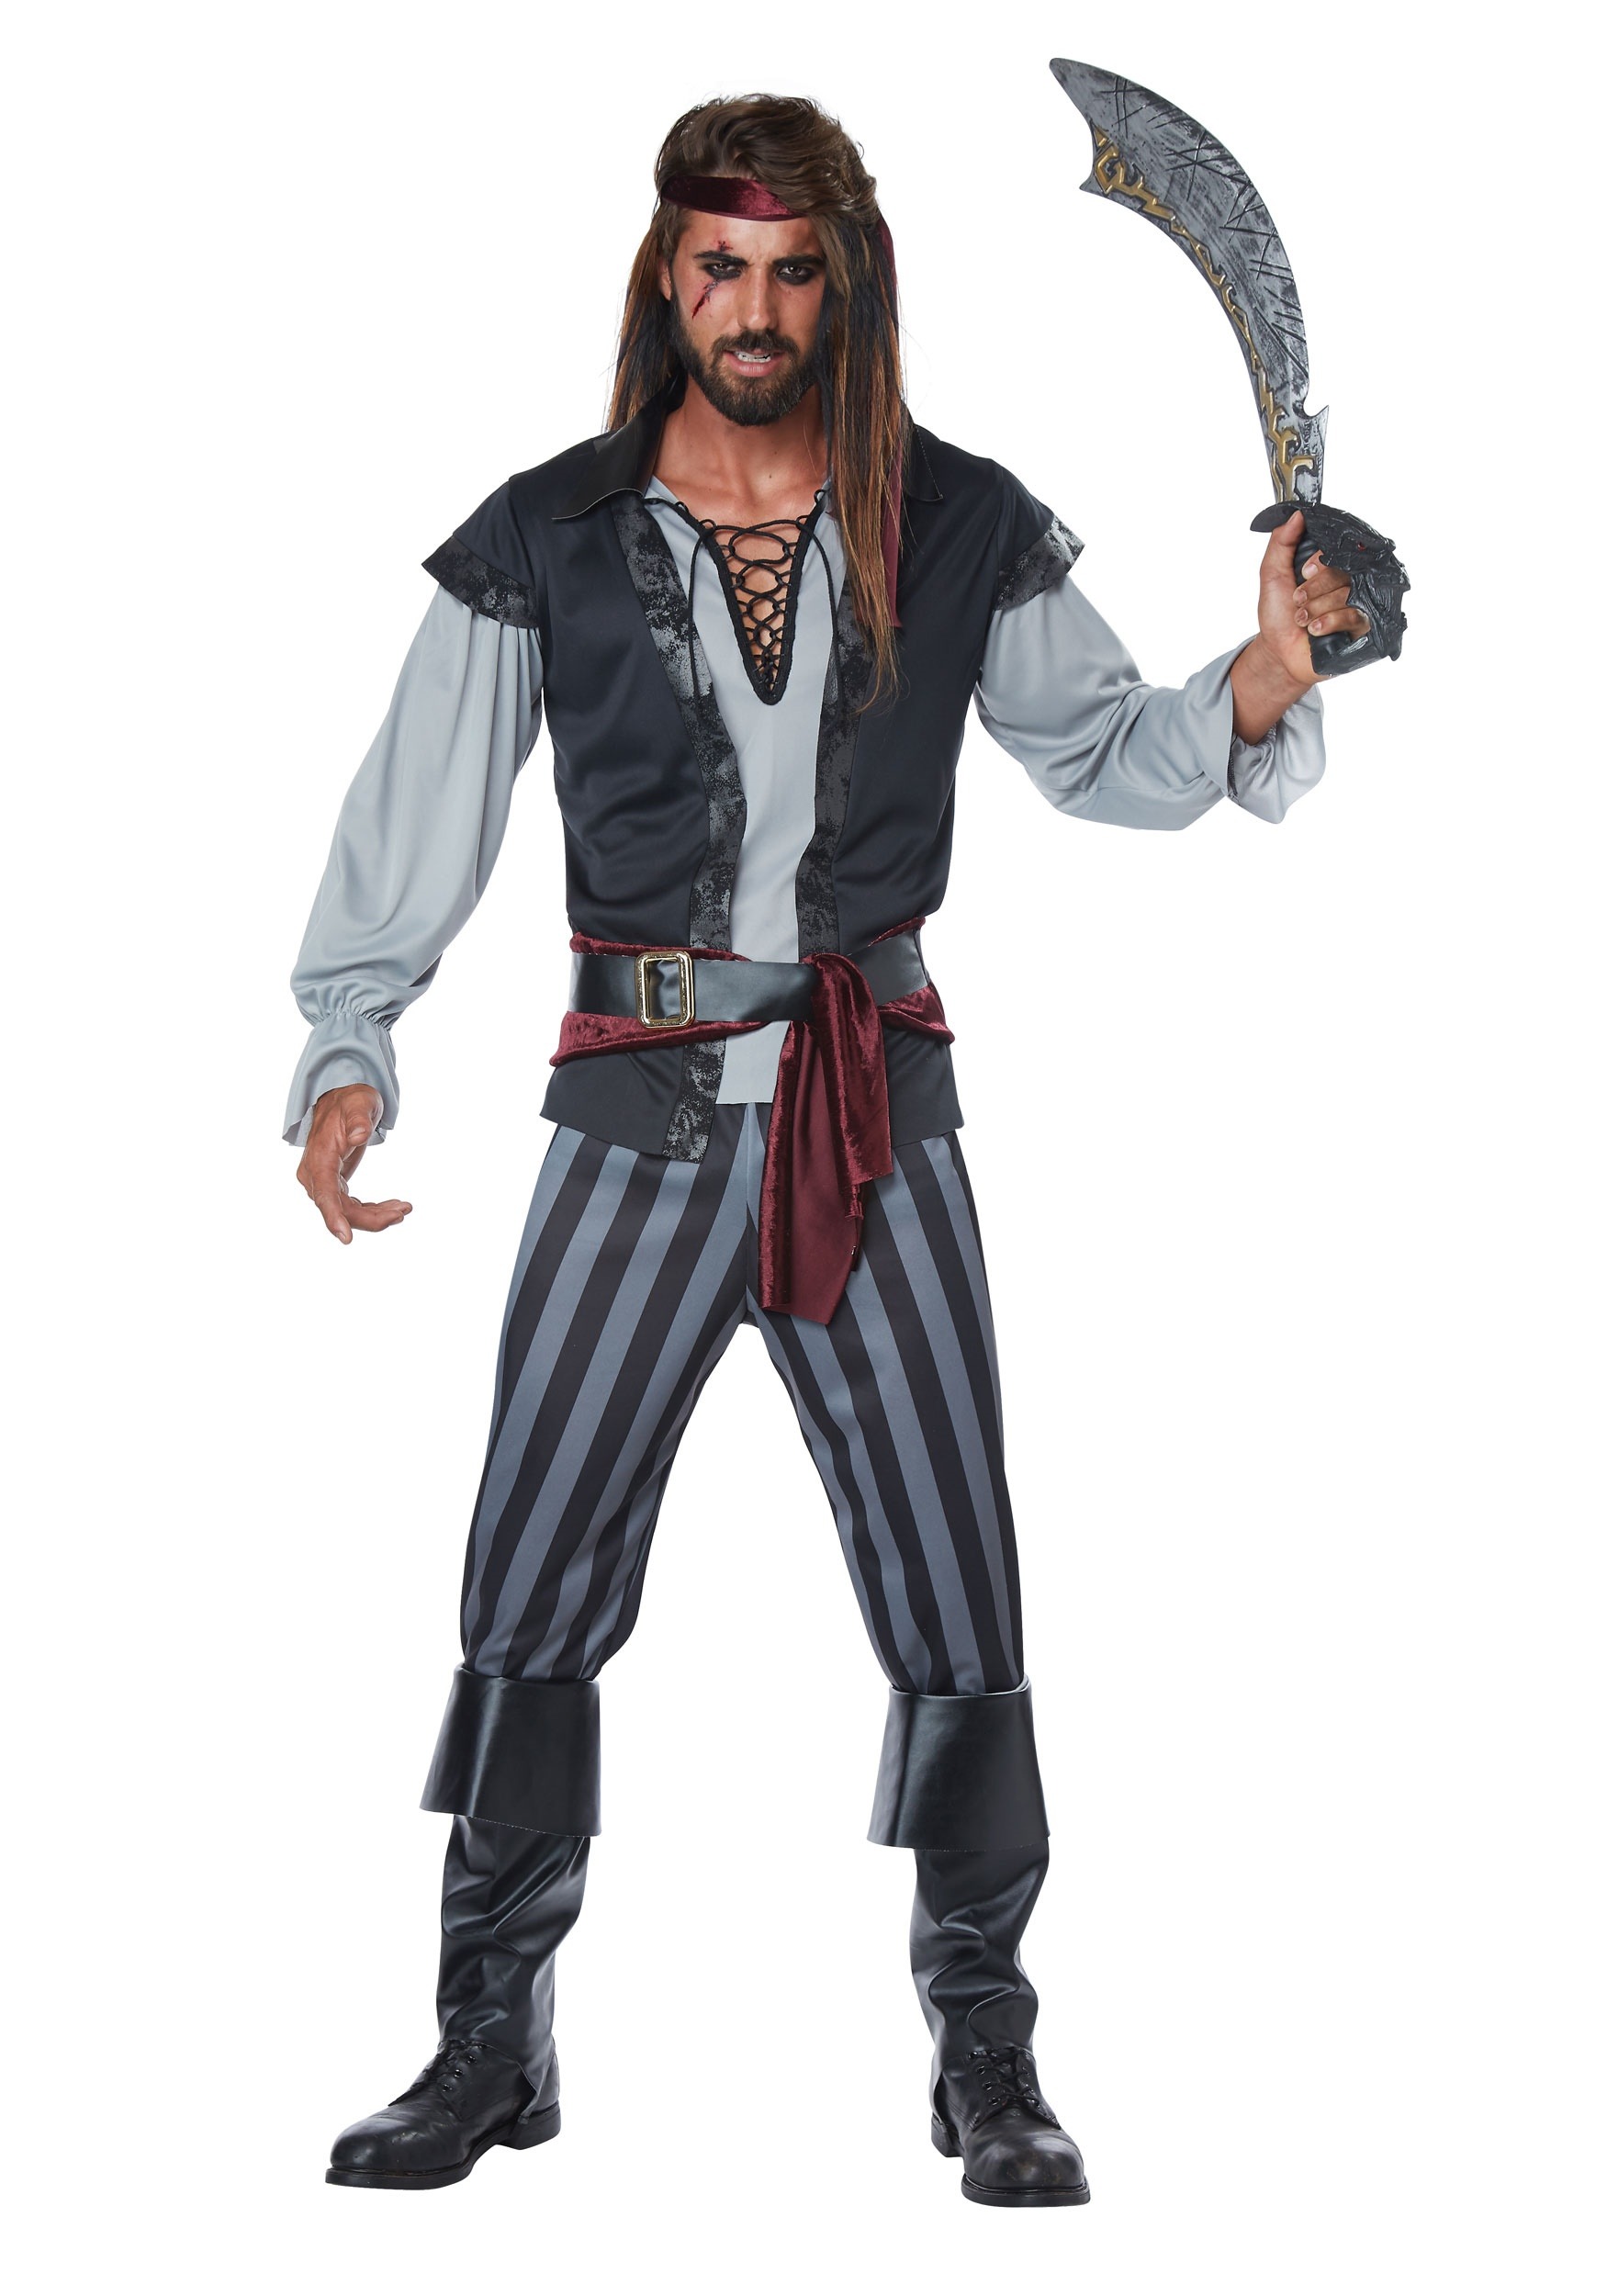 Image of Scallywag Pirate Costume for Men ID CA01443-XL